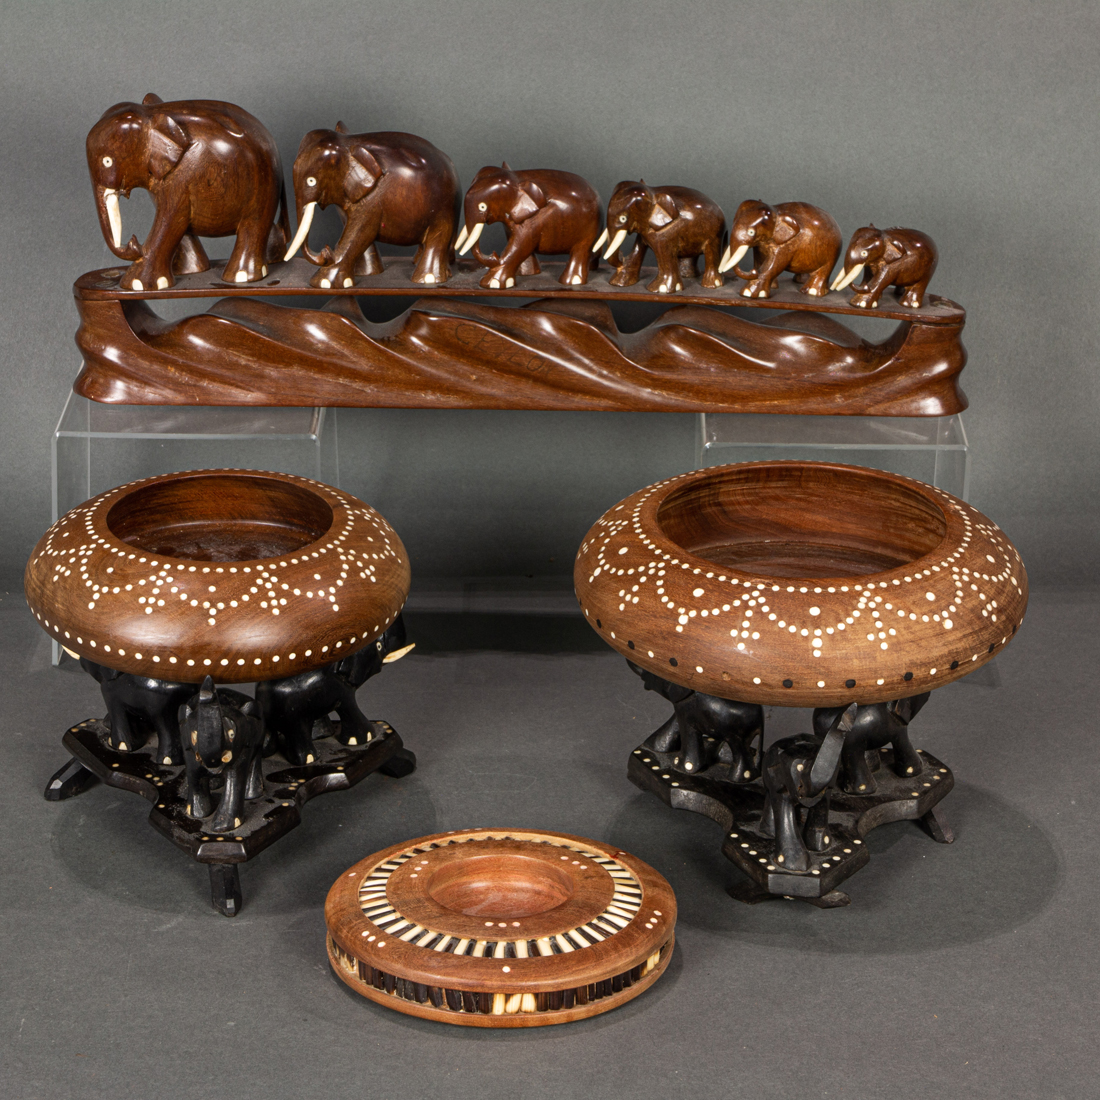 GROUP OF ANGLO-INDIAN TABLE ARTICLES,